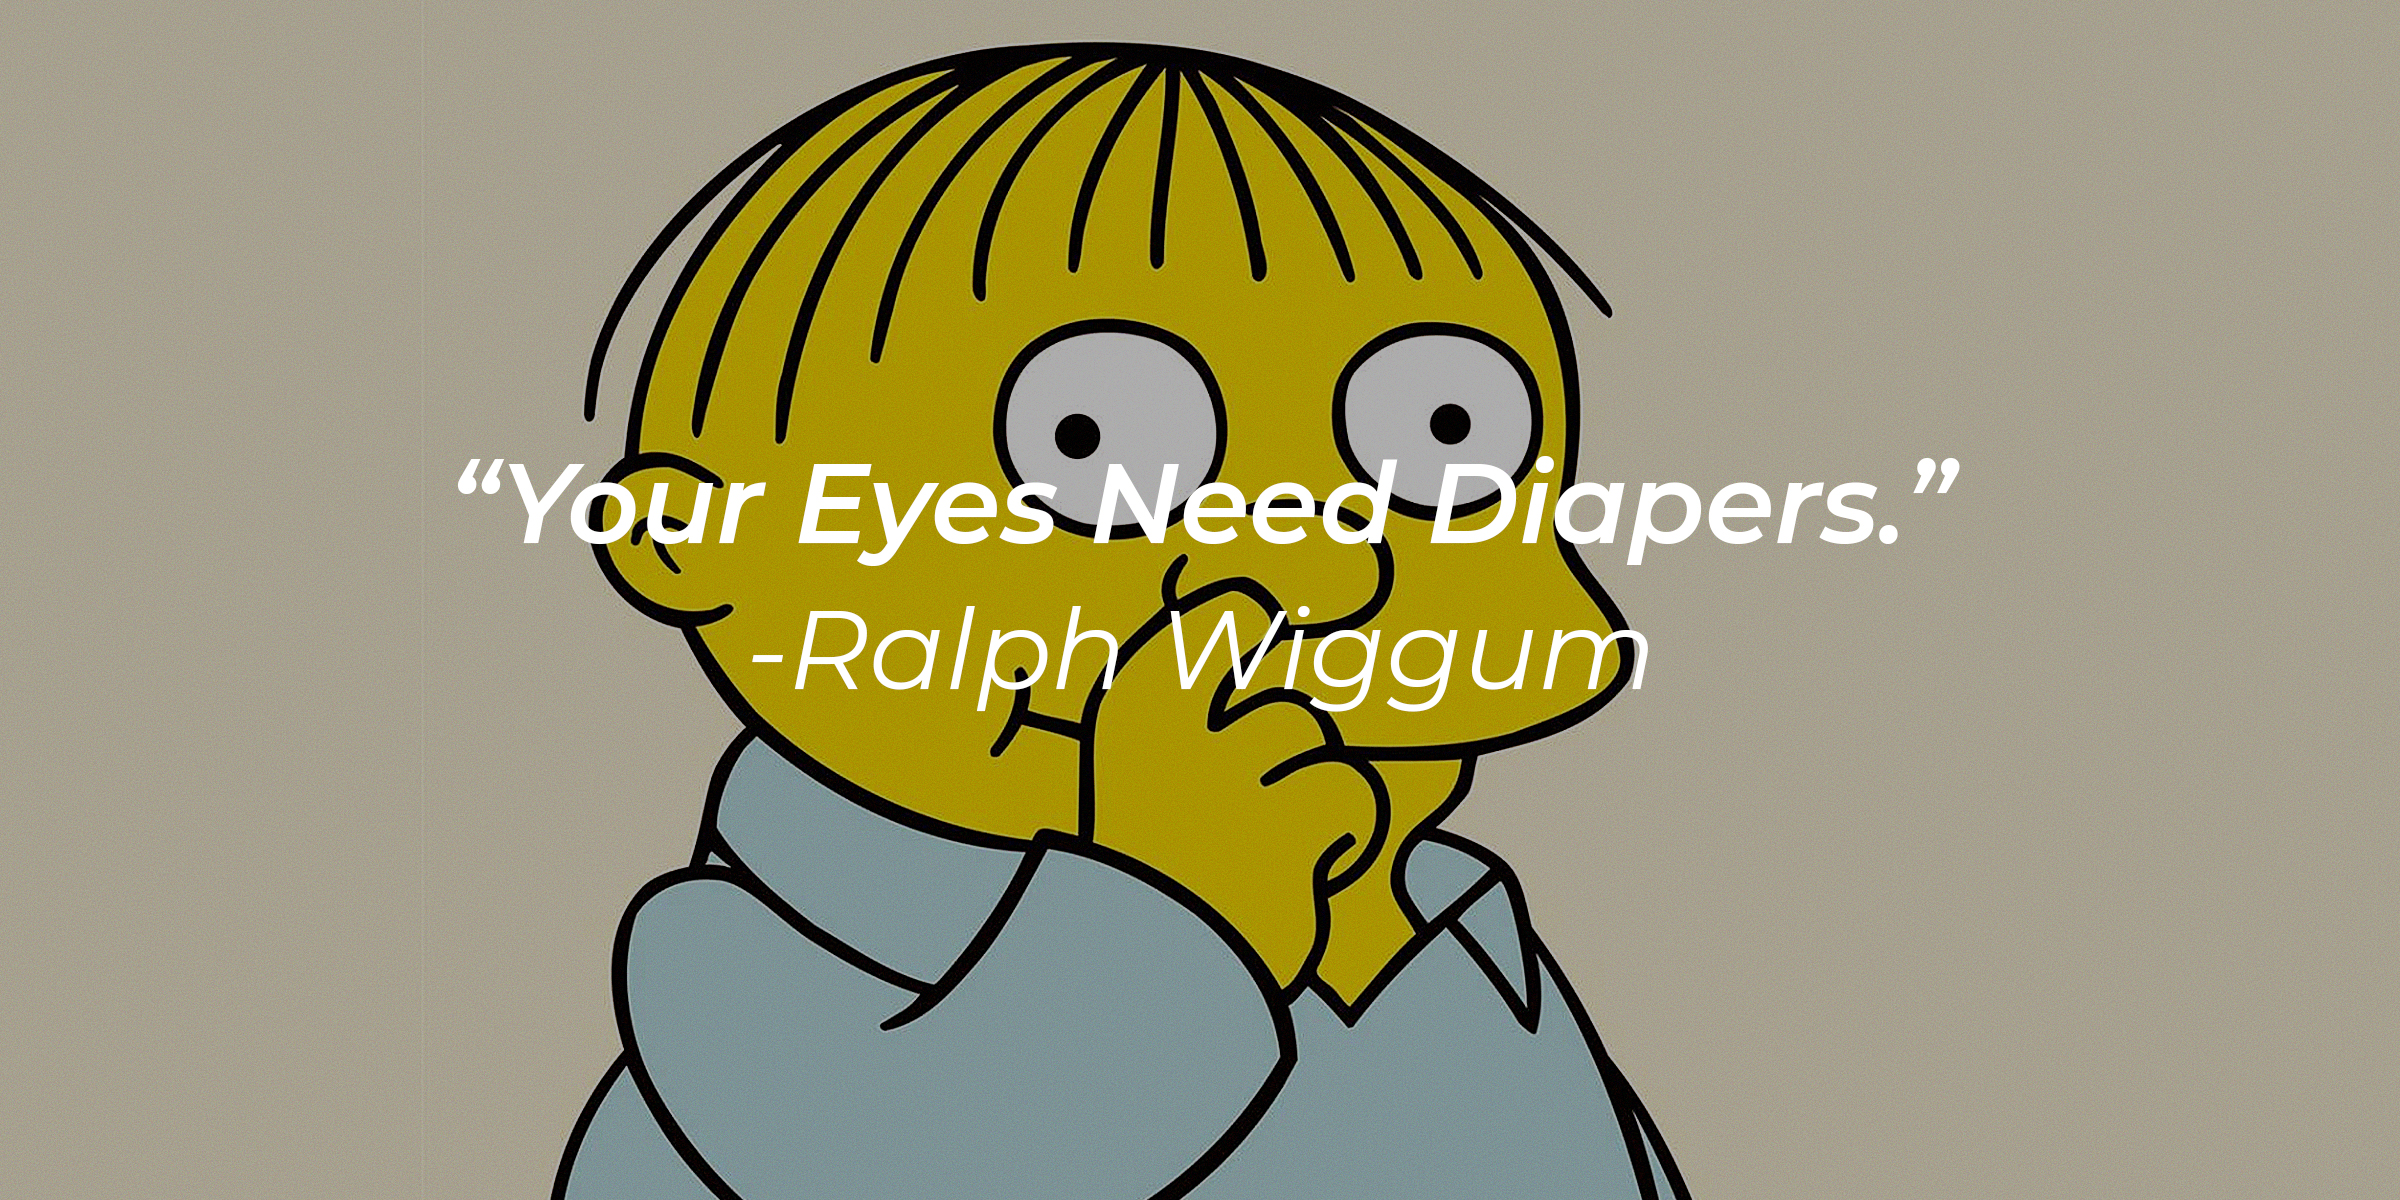 Ralph Wiggum with his quote: "Your Eyes Need Diapers." | Source: facebook.com/TheSimpsons